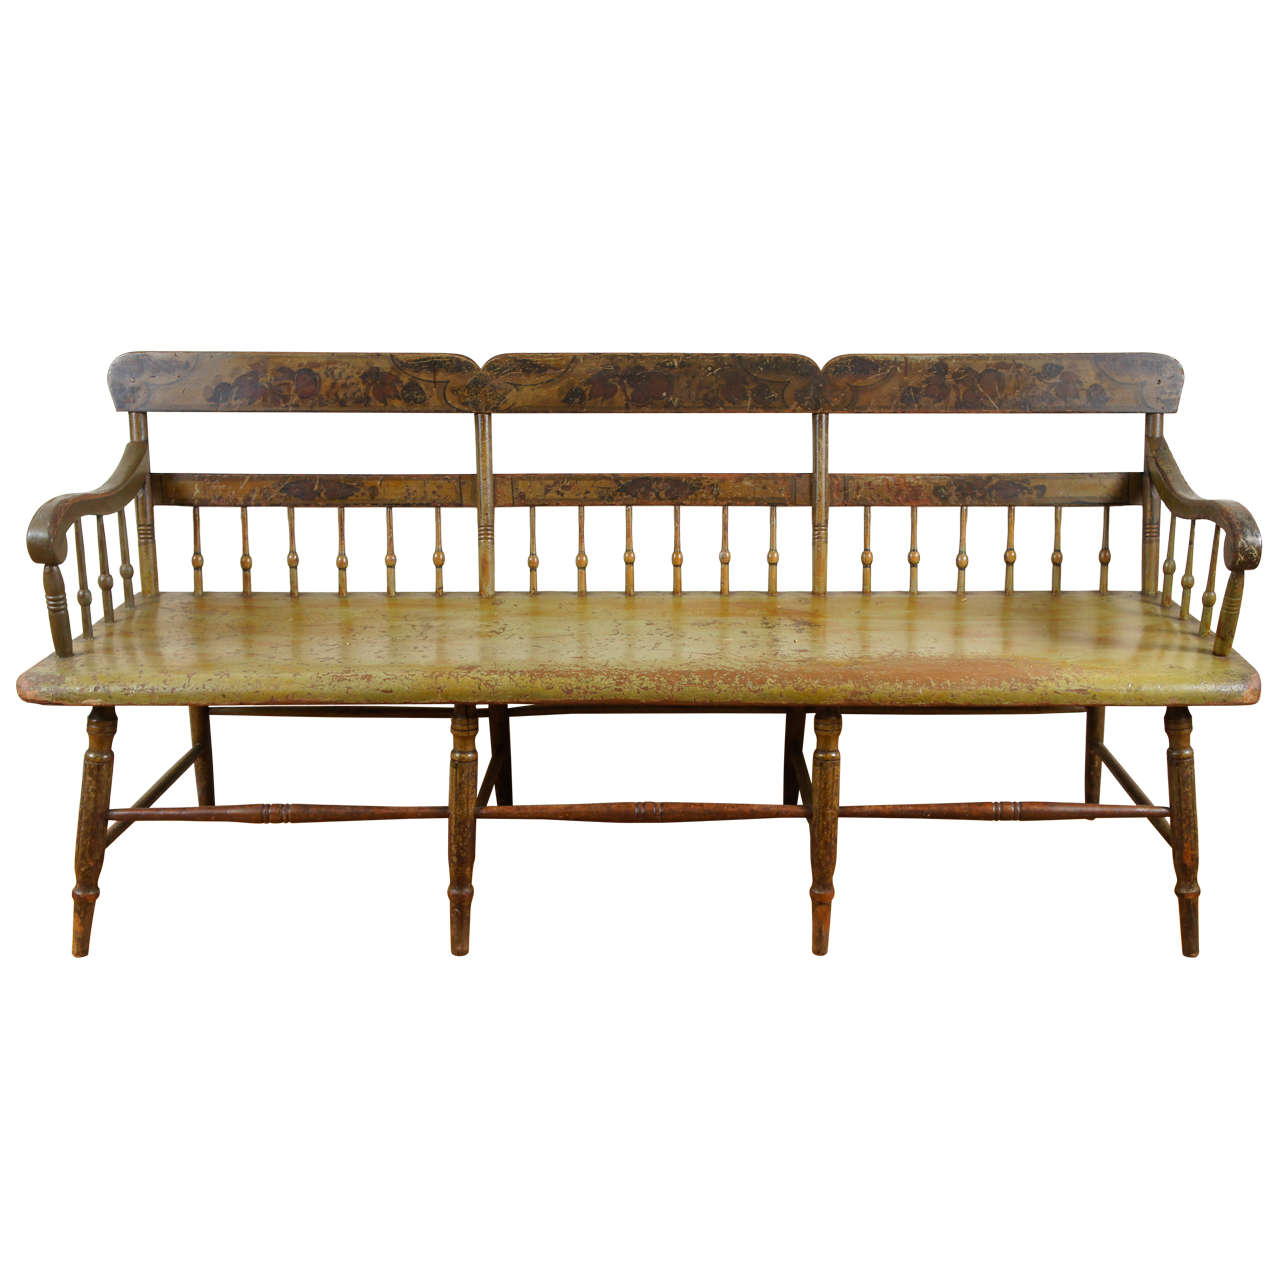 Pennsylvania Original Painted Spindle Bench